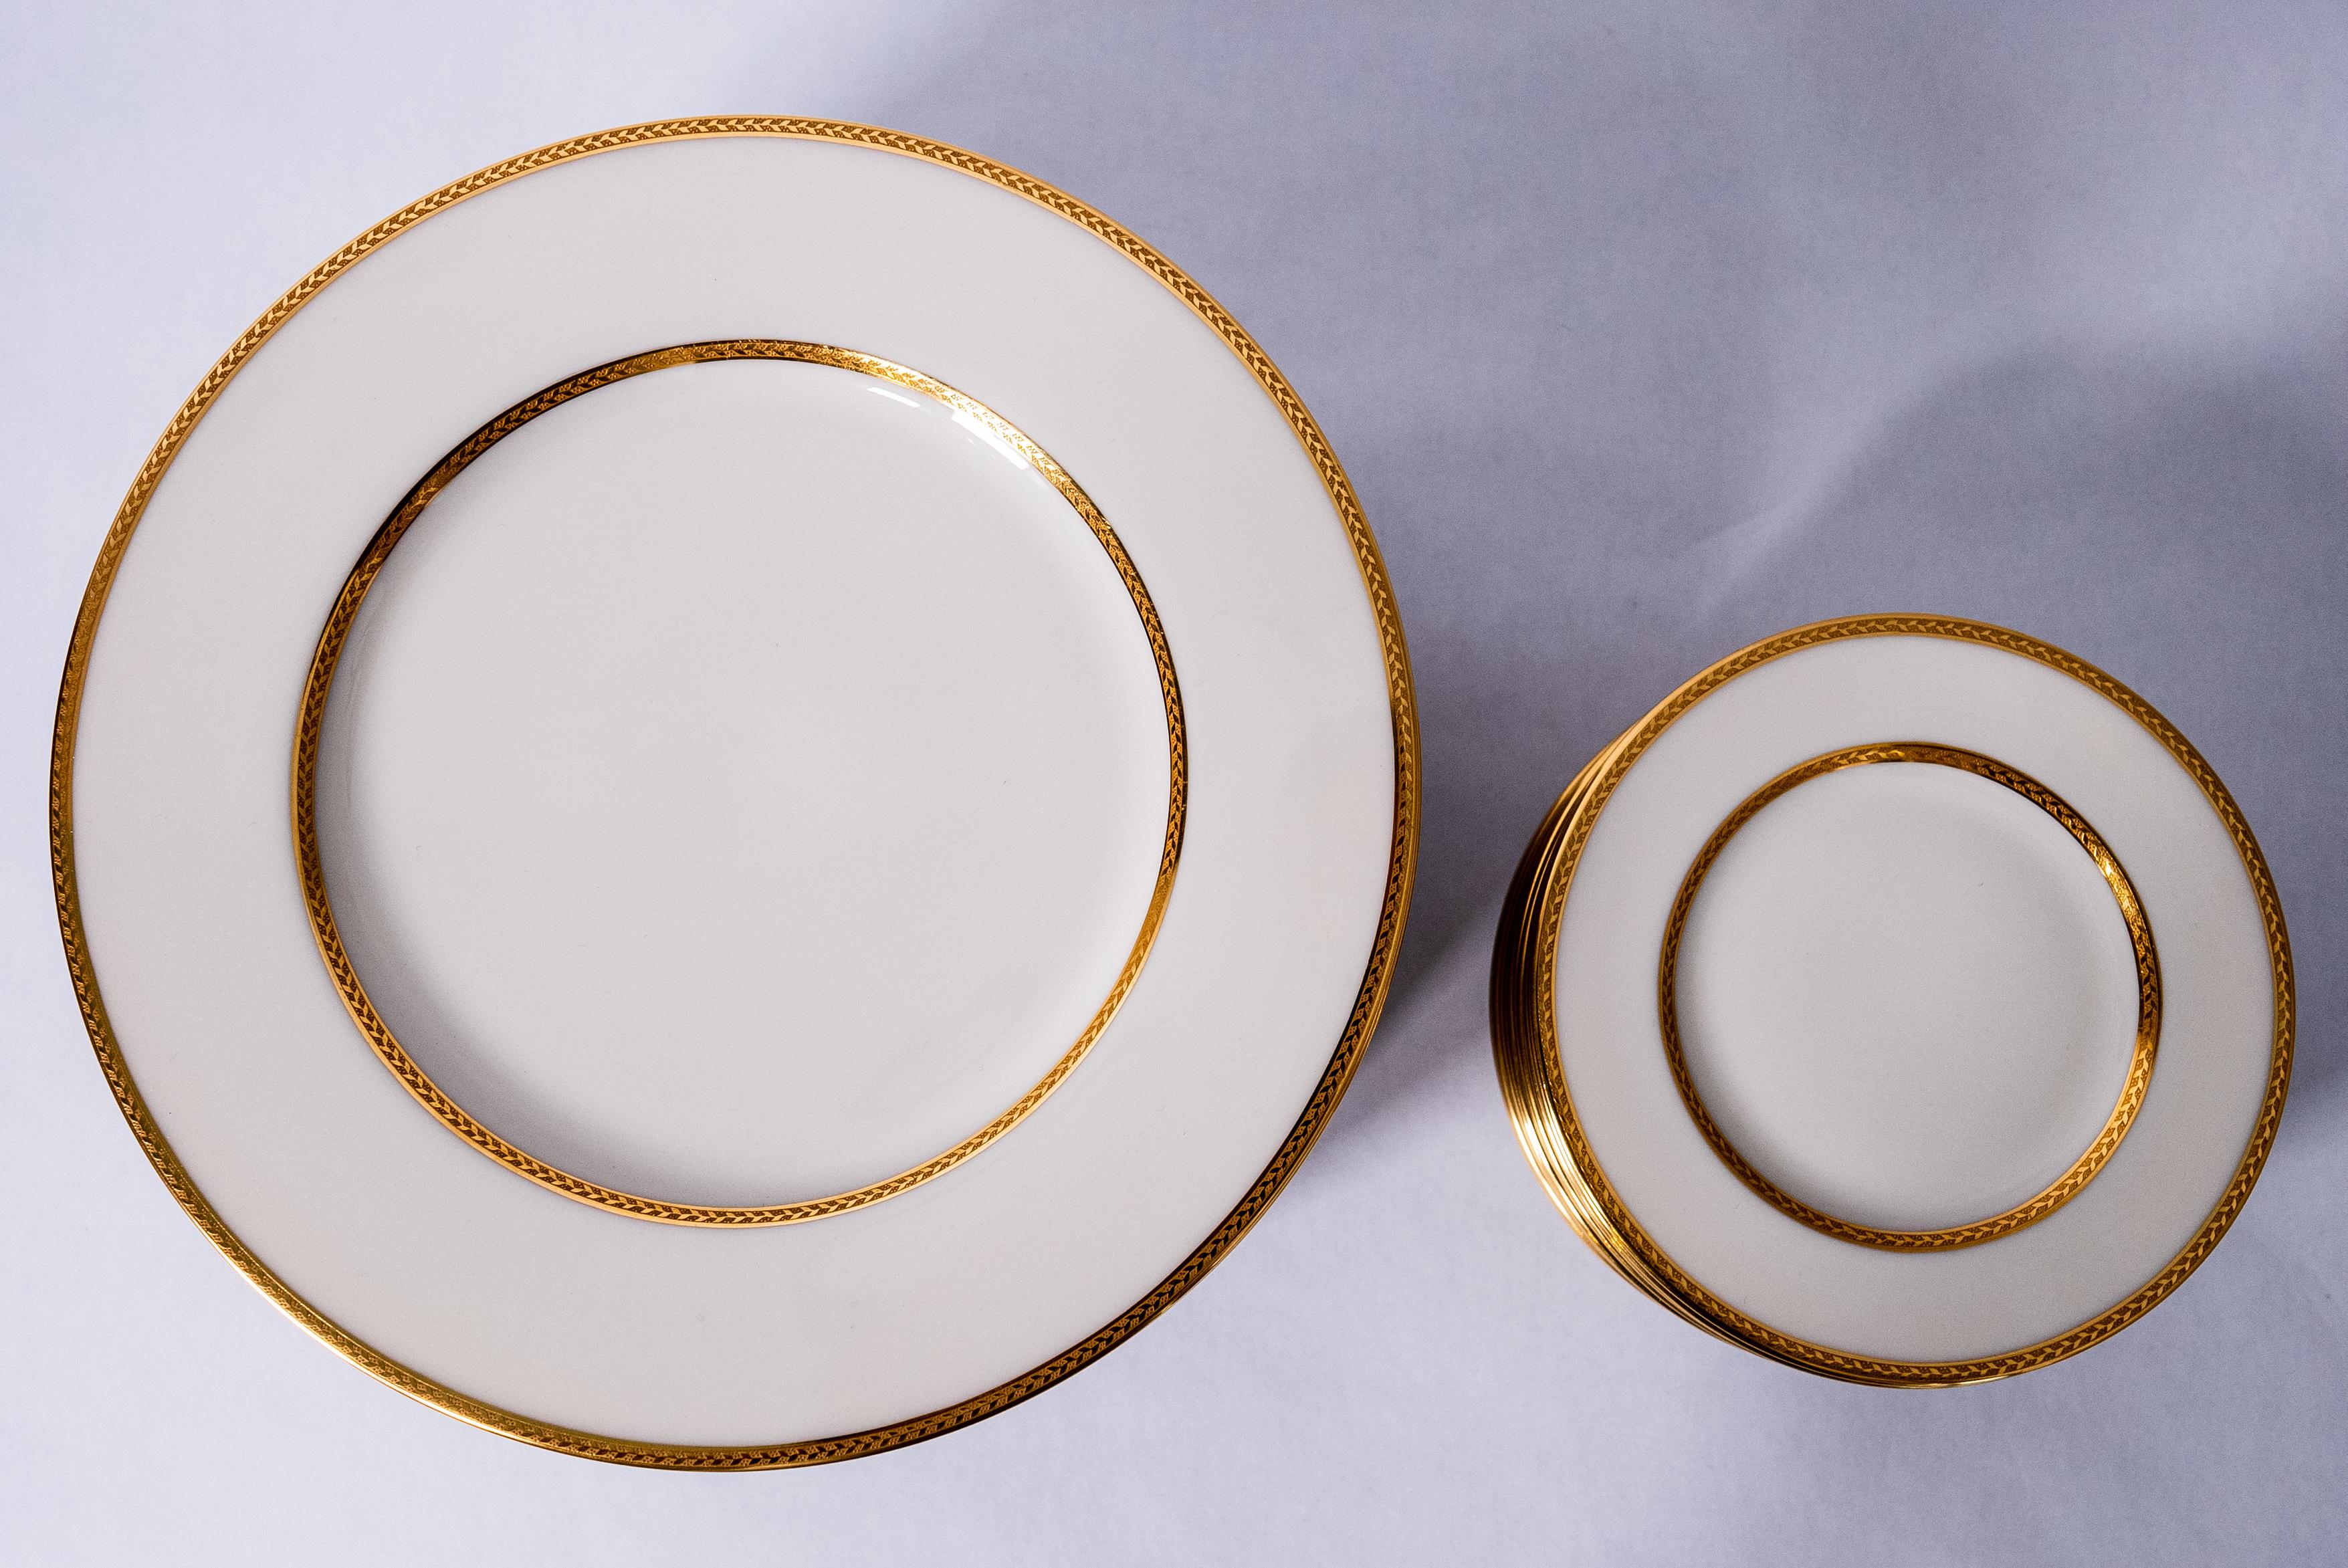 From one of America's oldest porcelain manufacturers i this custom ordered grouping from the fine Gilded Age Retailer of Marshall Fields Chicago. This set features 12 generous dinner plates and 12 side or bread plates. Crisp white porcelain and